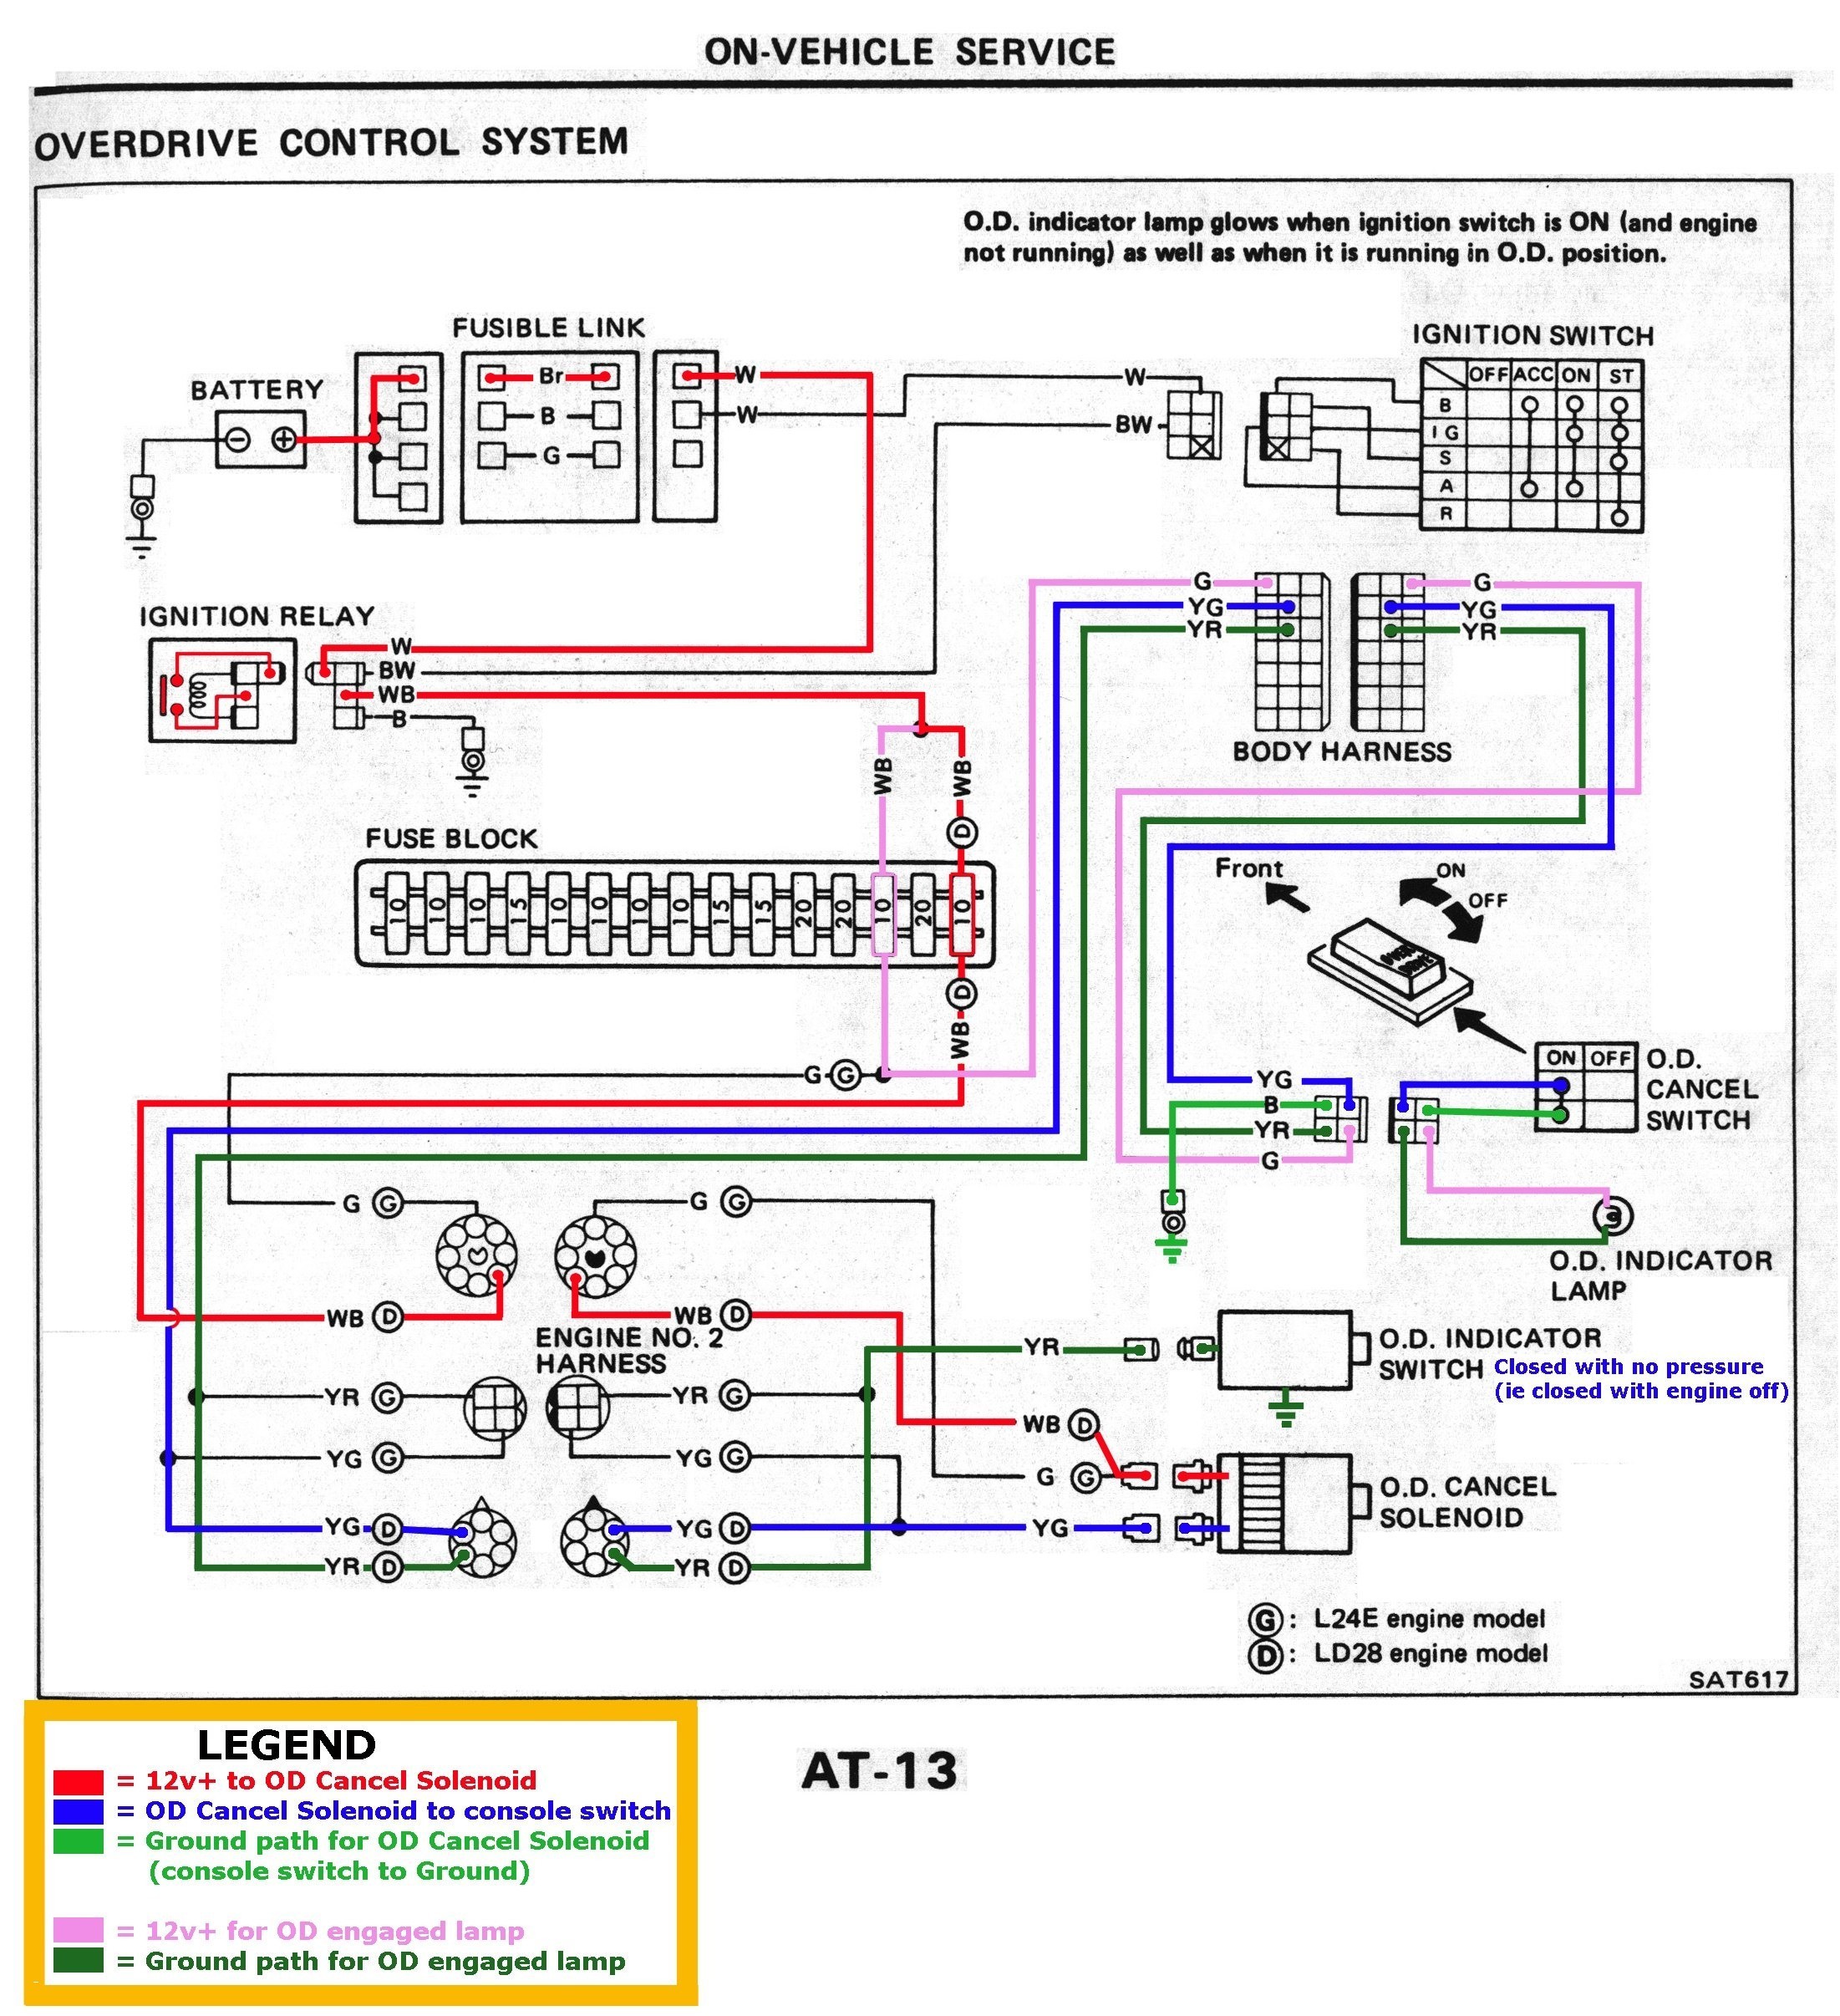 Wiring Diagram Pot Lights Fresh Wiring Diagram for Recessed Lighting In Series Valid Light Switch